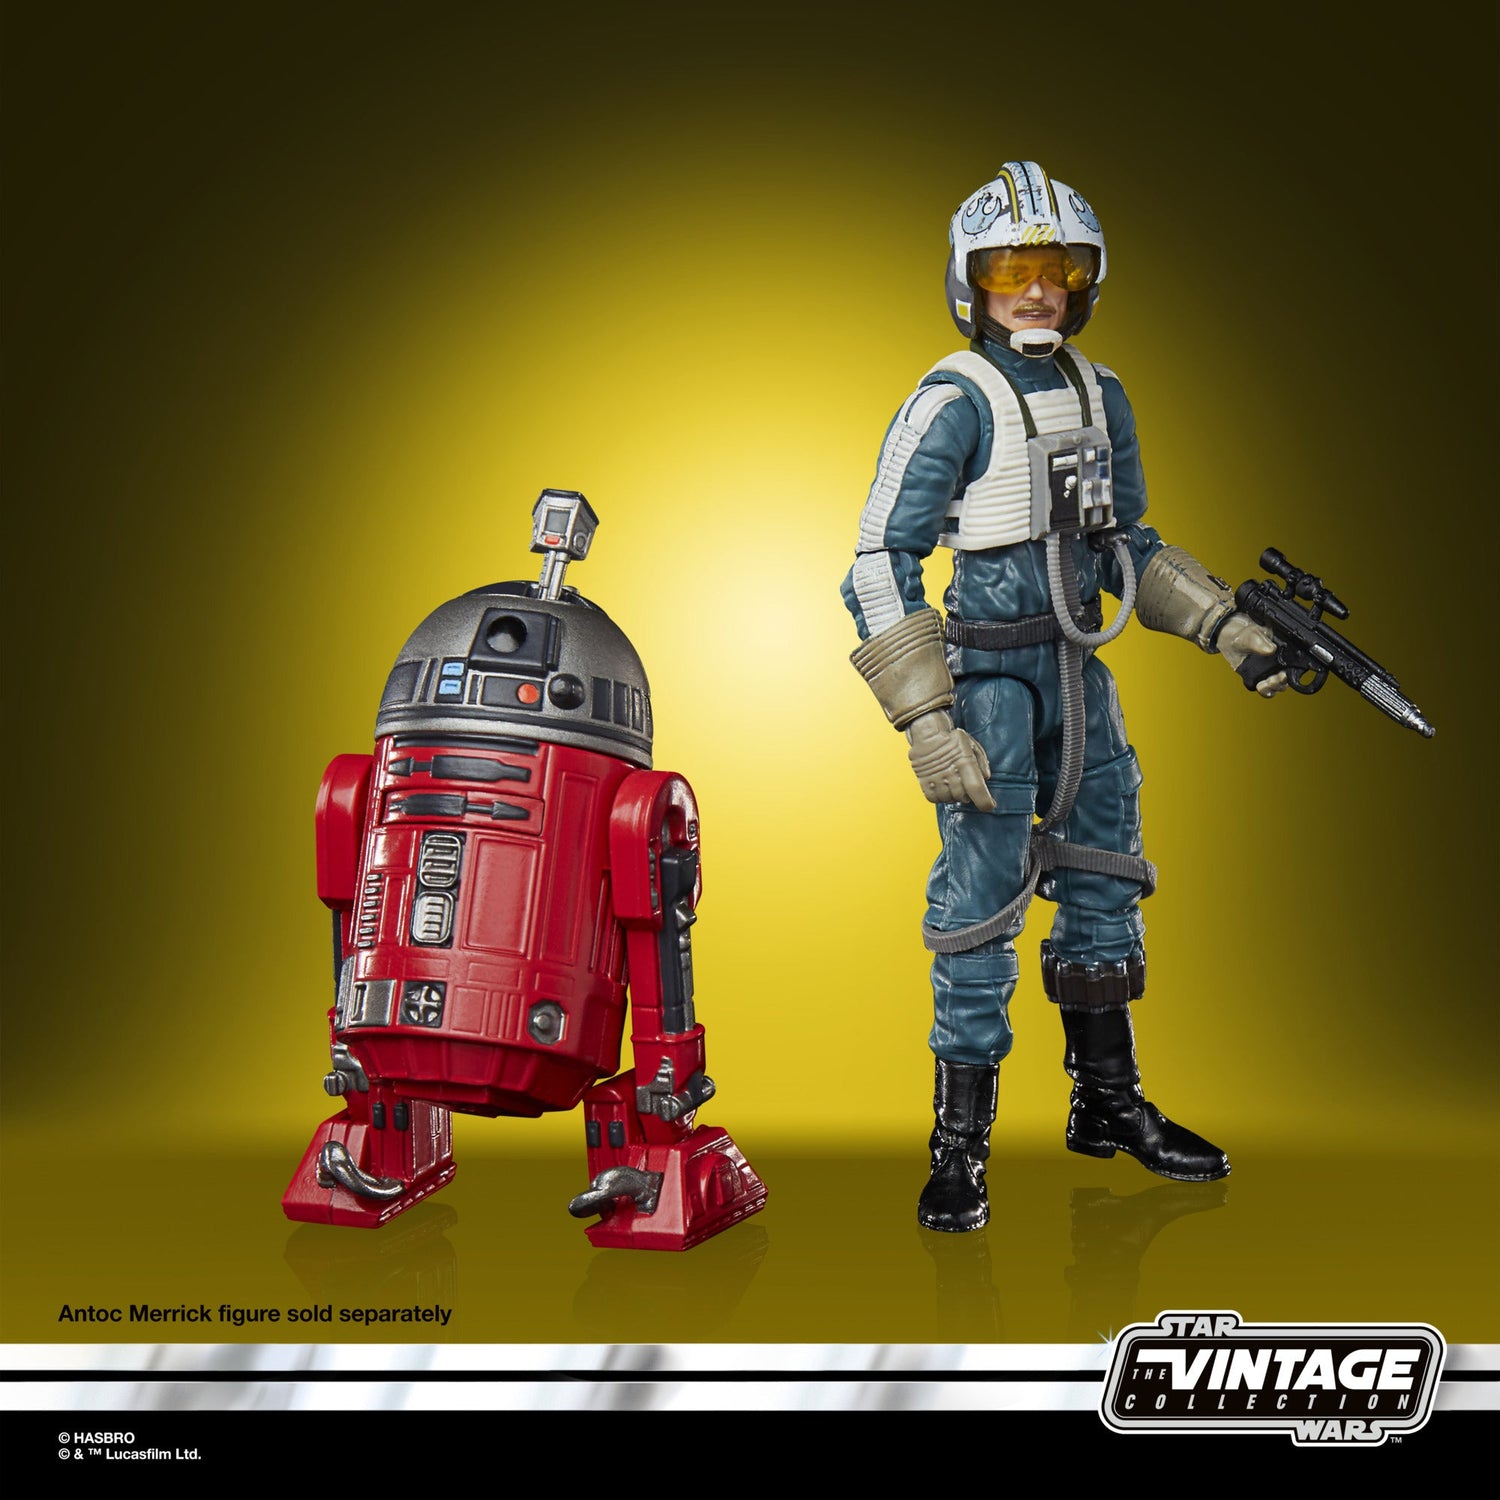 Star Wars: The Vintage Collection R2-SHW (ANTOC MERRICK’S DROID) Hasbro